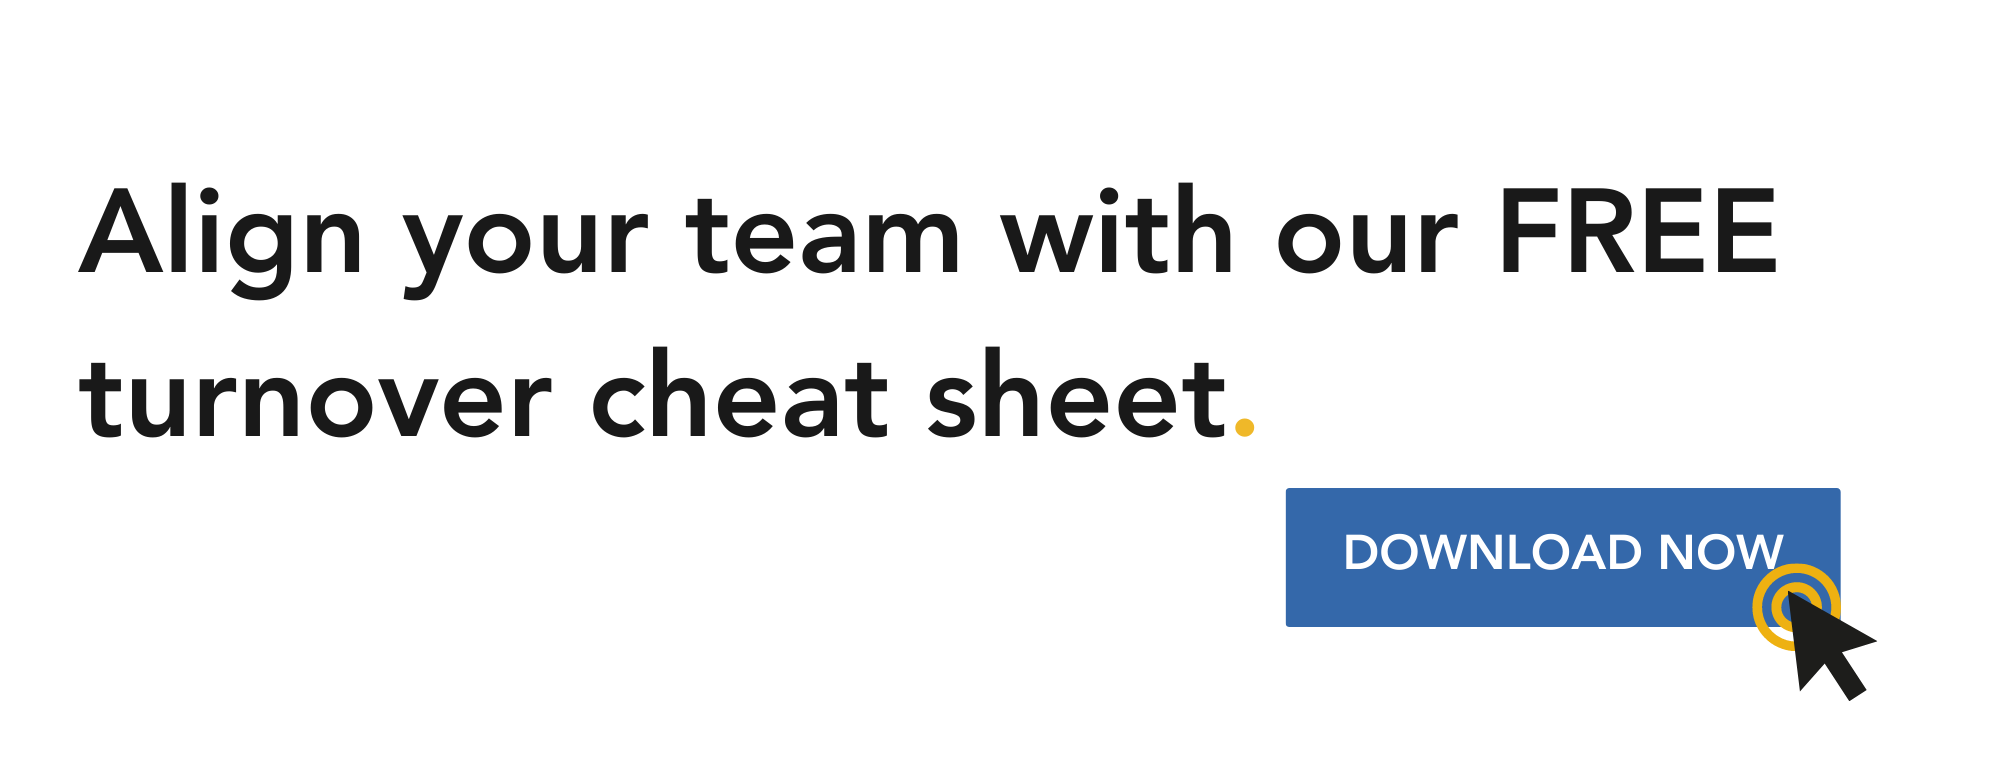 Align your team with our free turnover cheat sheet. Click to download.